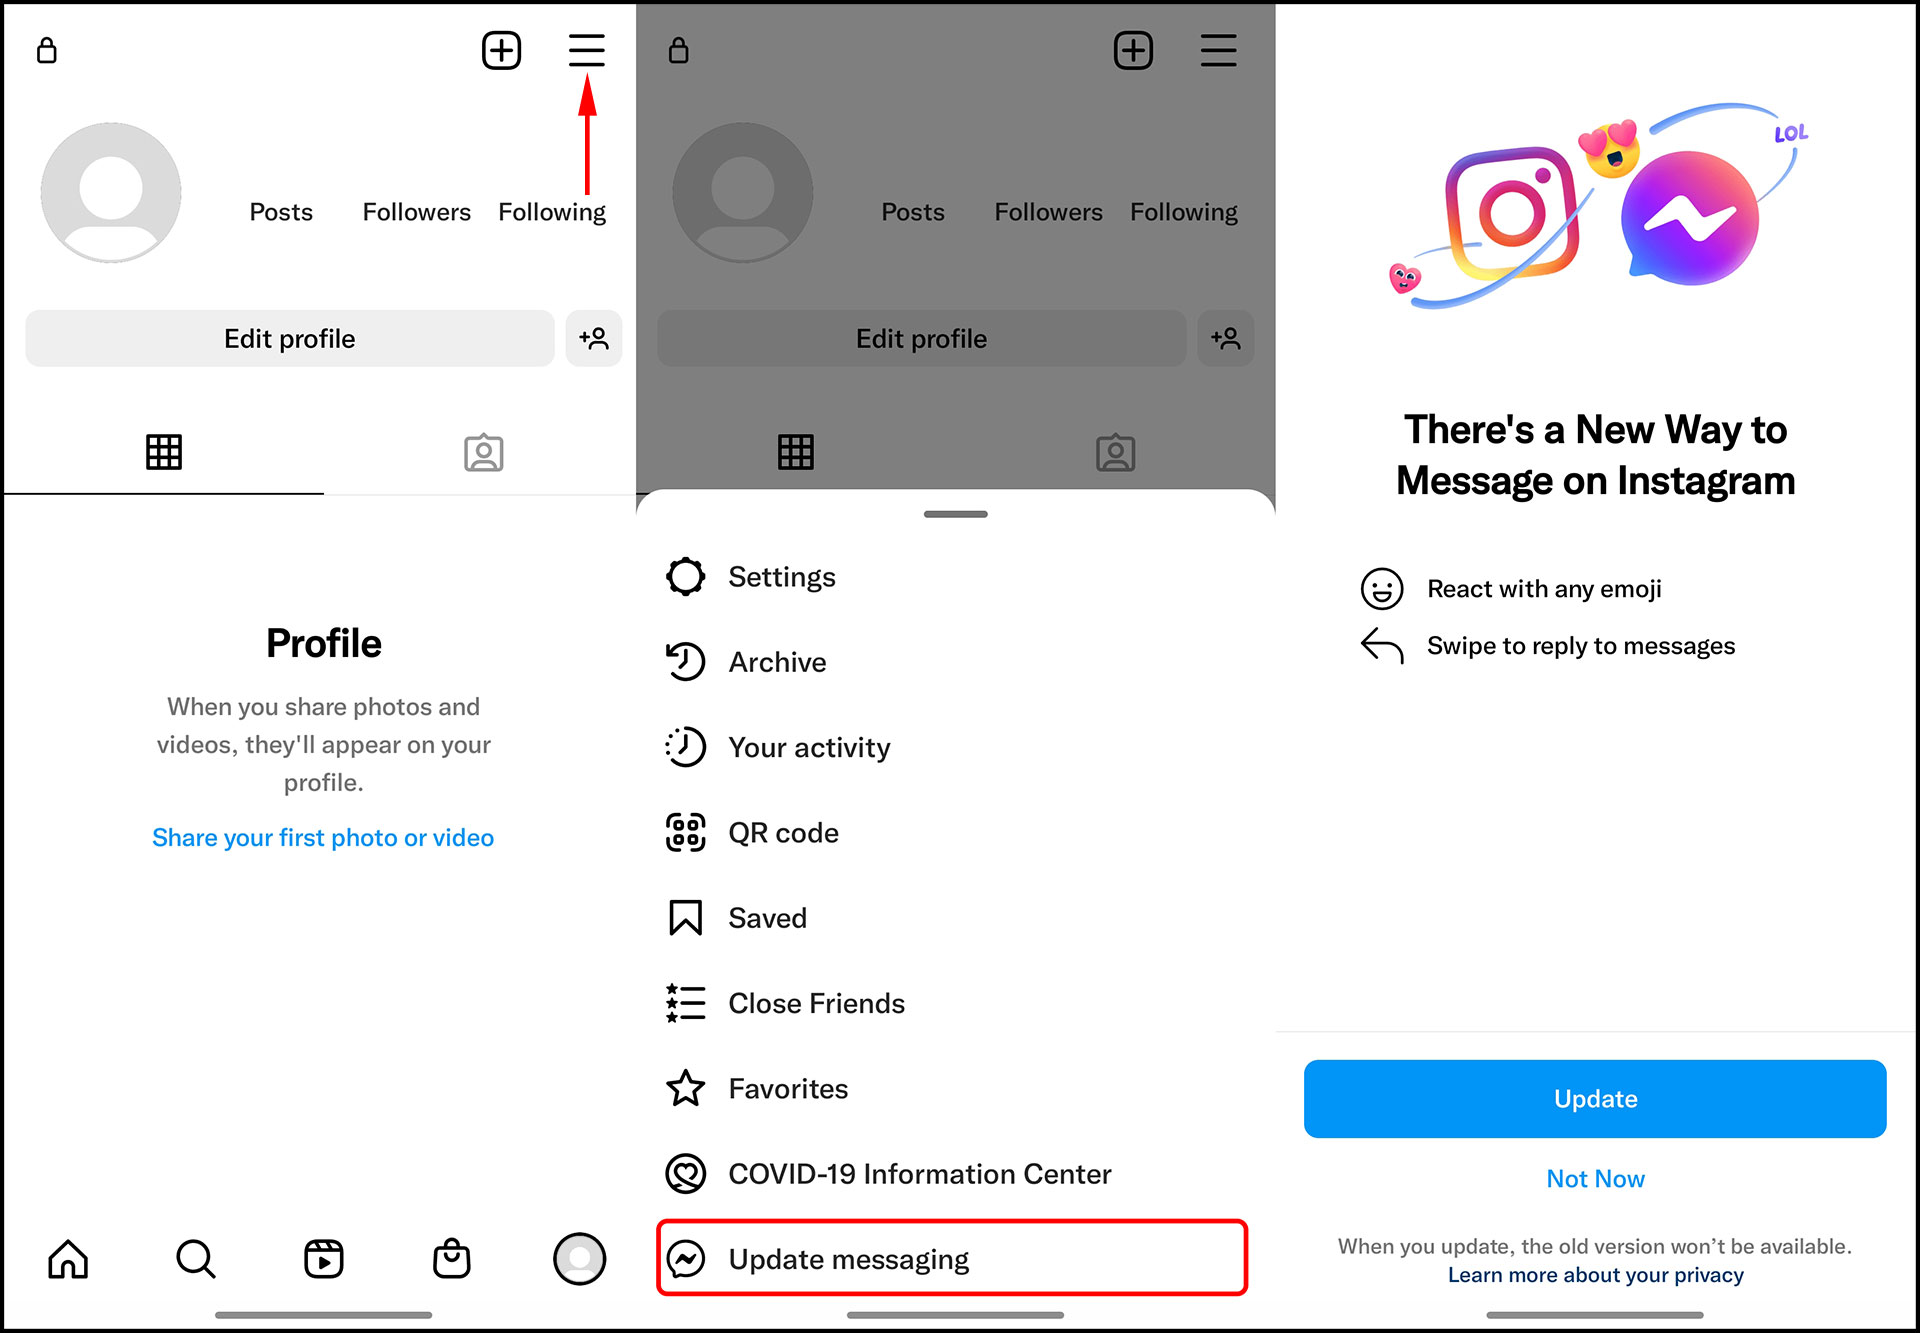 Activating the new messenger features on Instagram